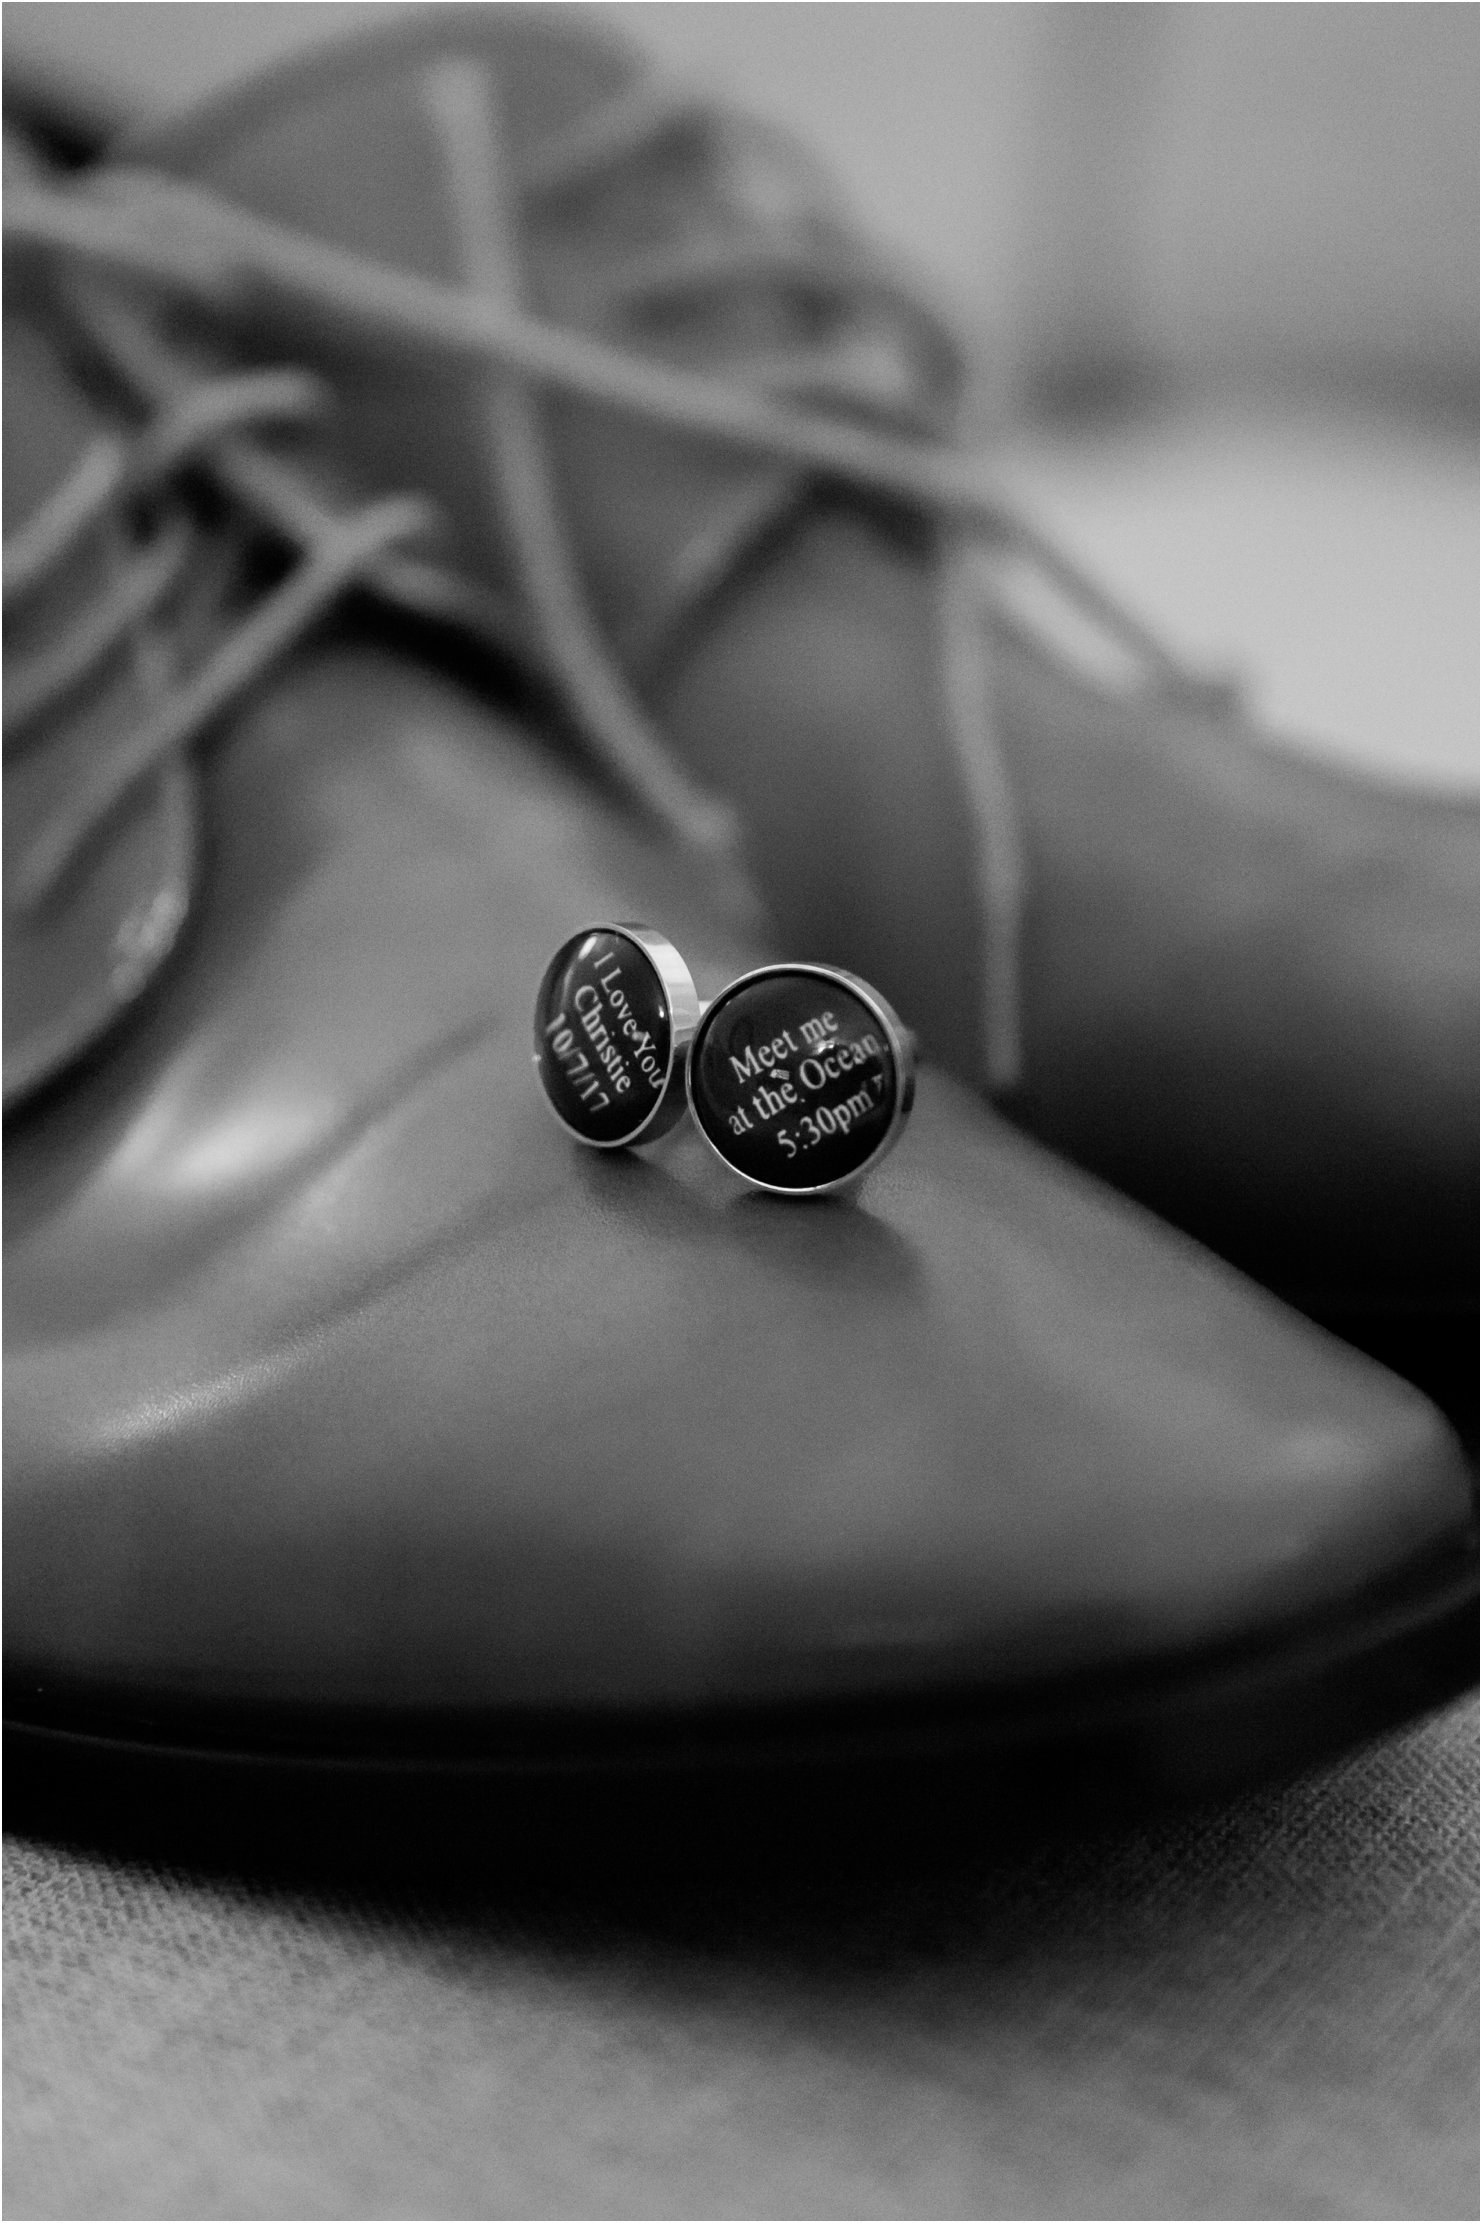 Anna Maria Island Wedding Photography of the grooms details, shoes and custom cuff links